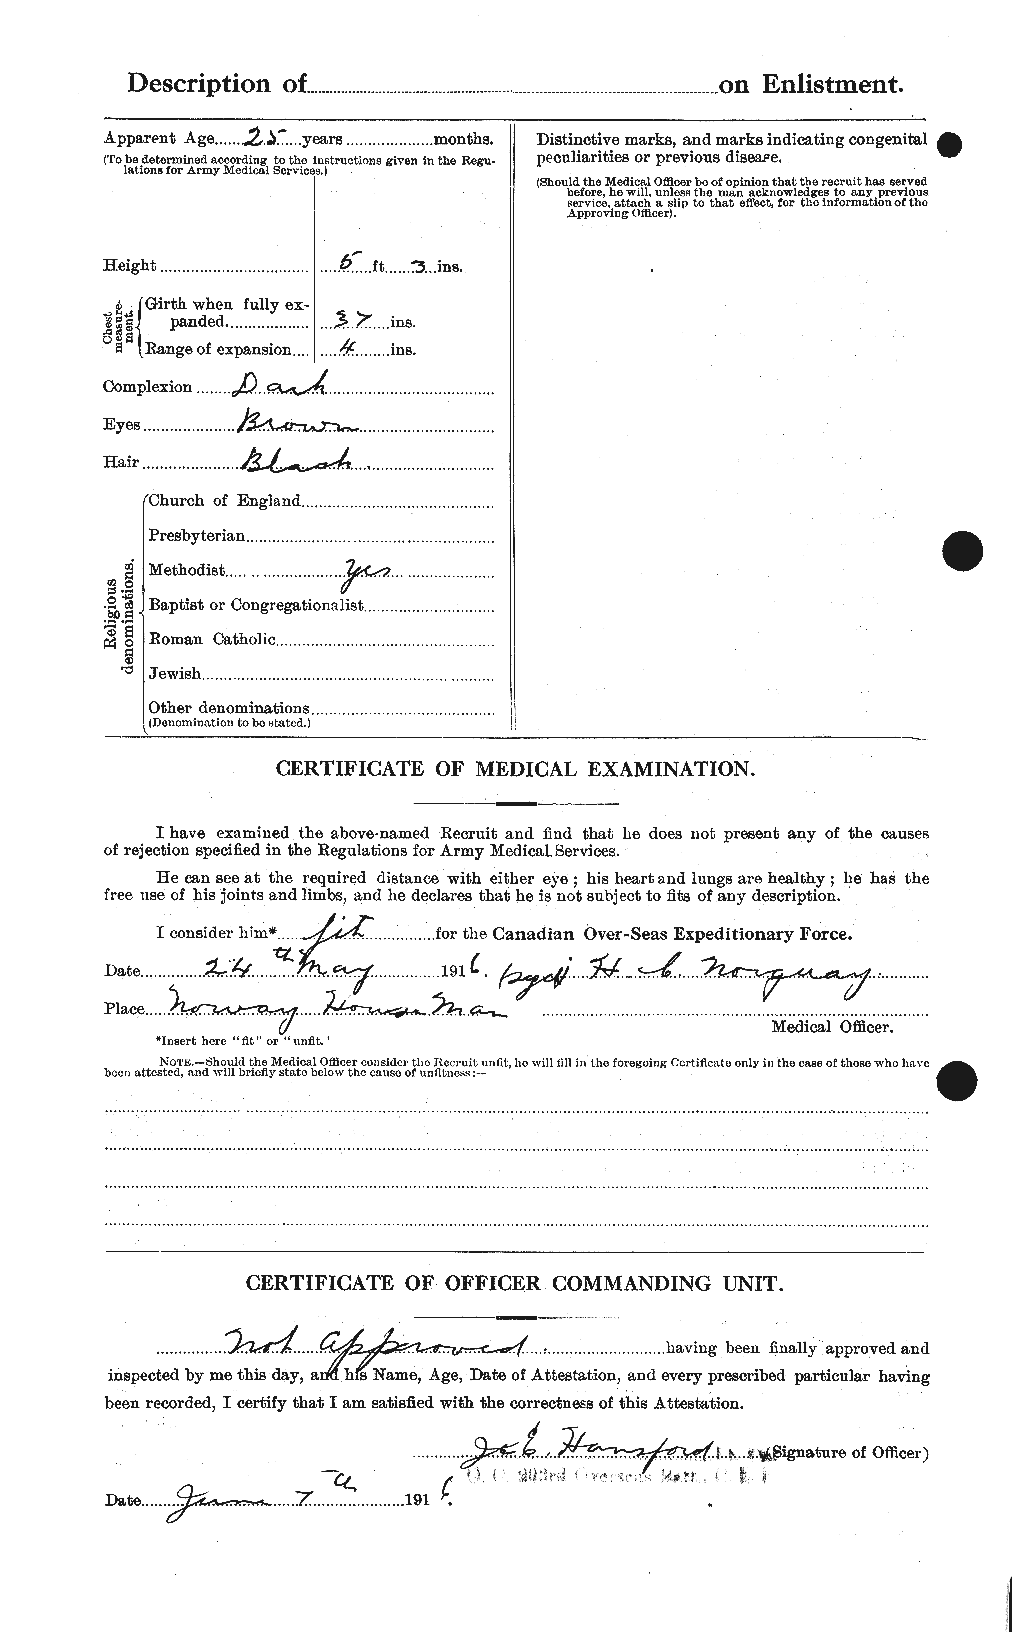 Personnel Records of the First World War - CEF 530210b